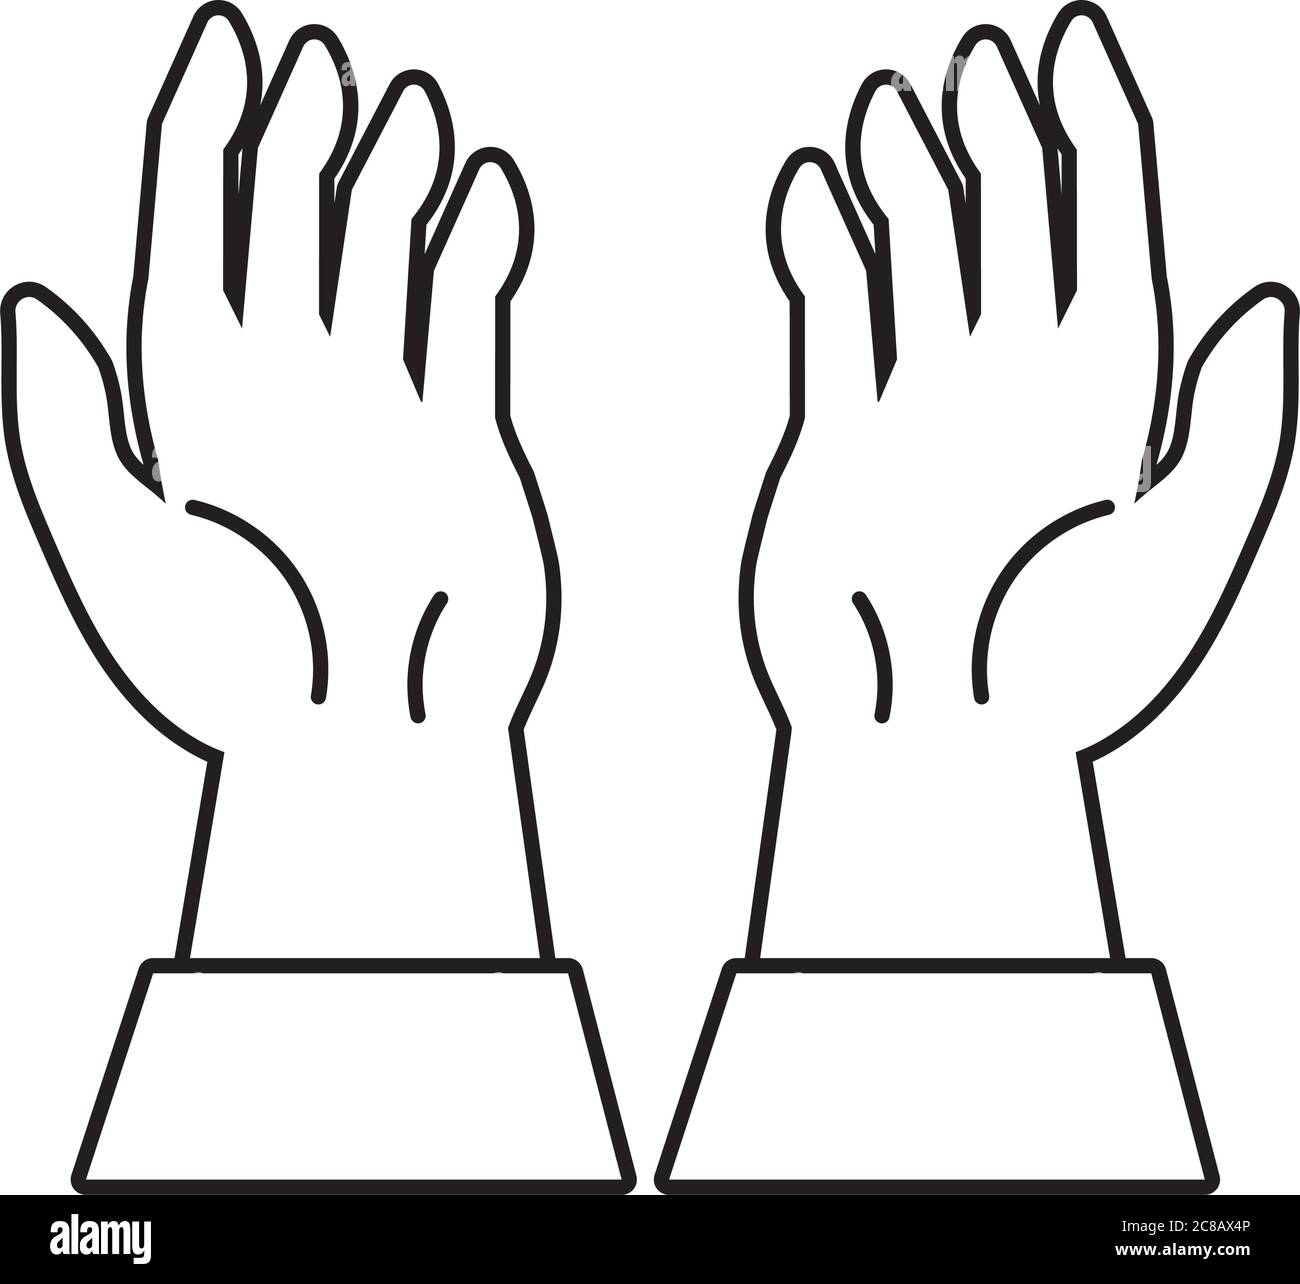 hands human up protesting line style icon vector illustration design Stock Vector